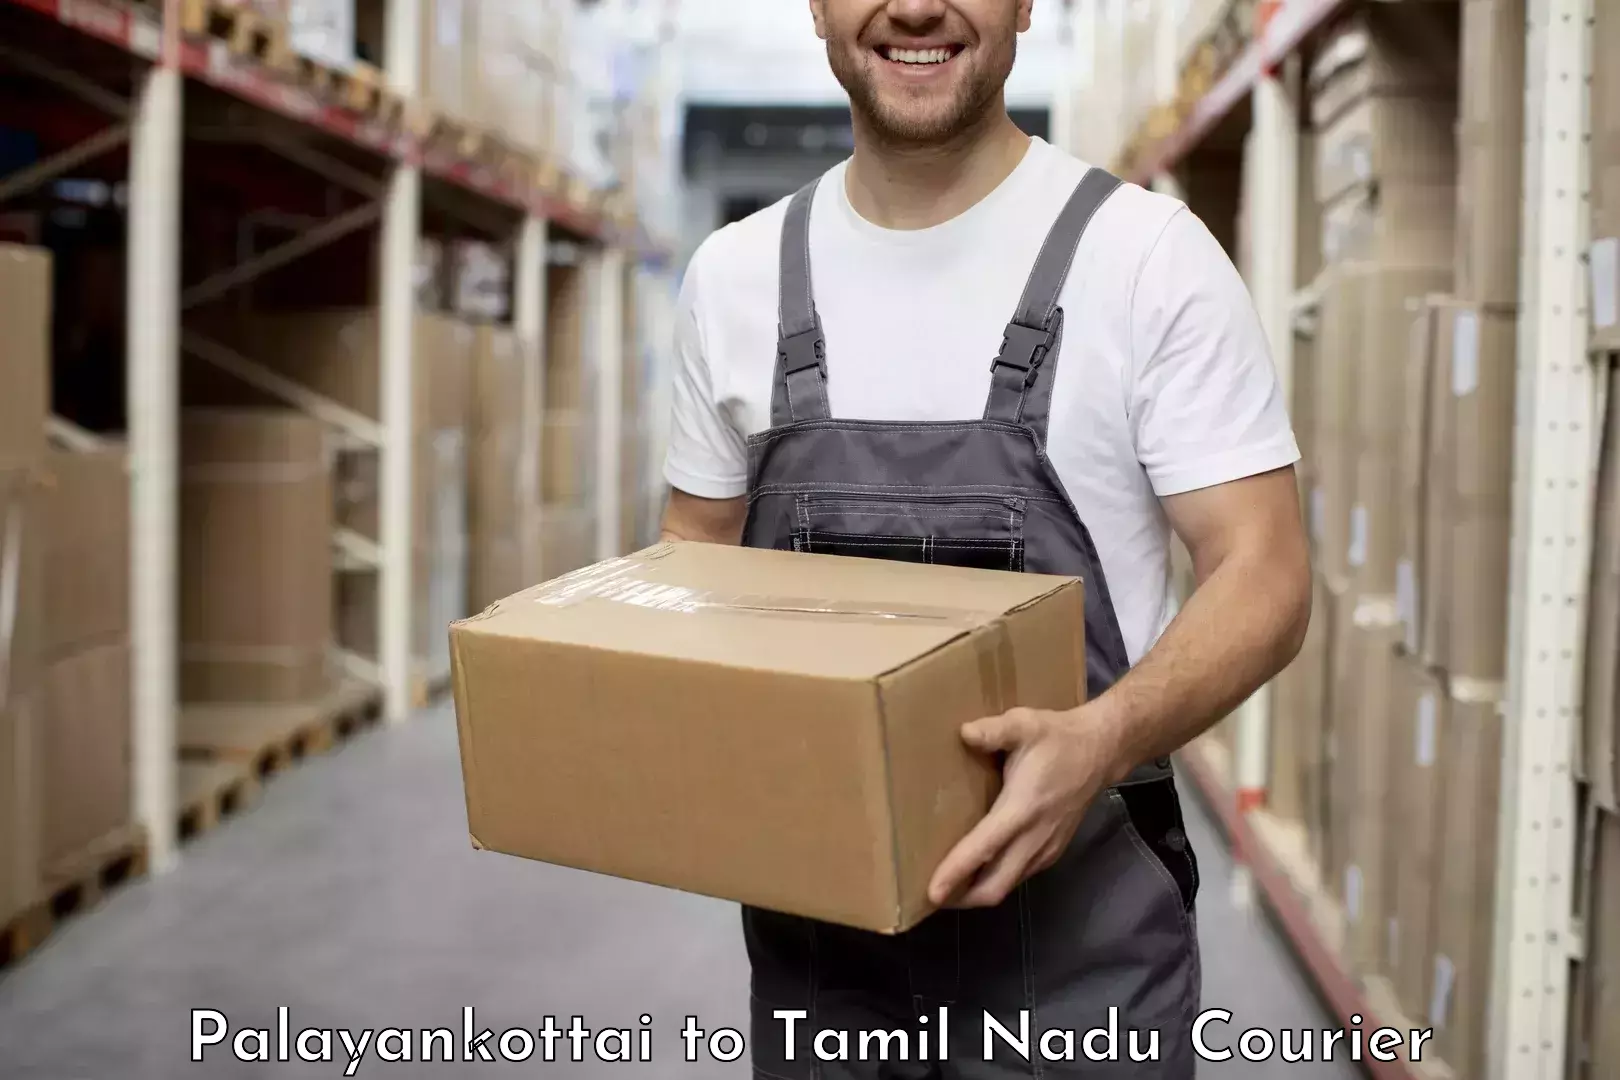 24-hour courier service Palayankottai to Thisayanvilai